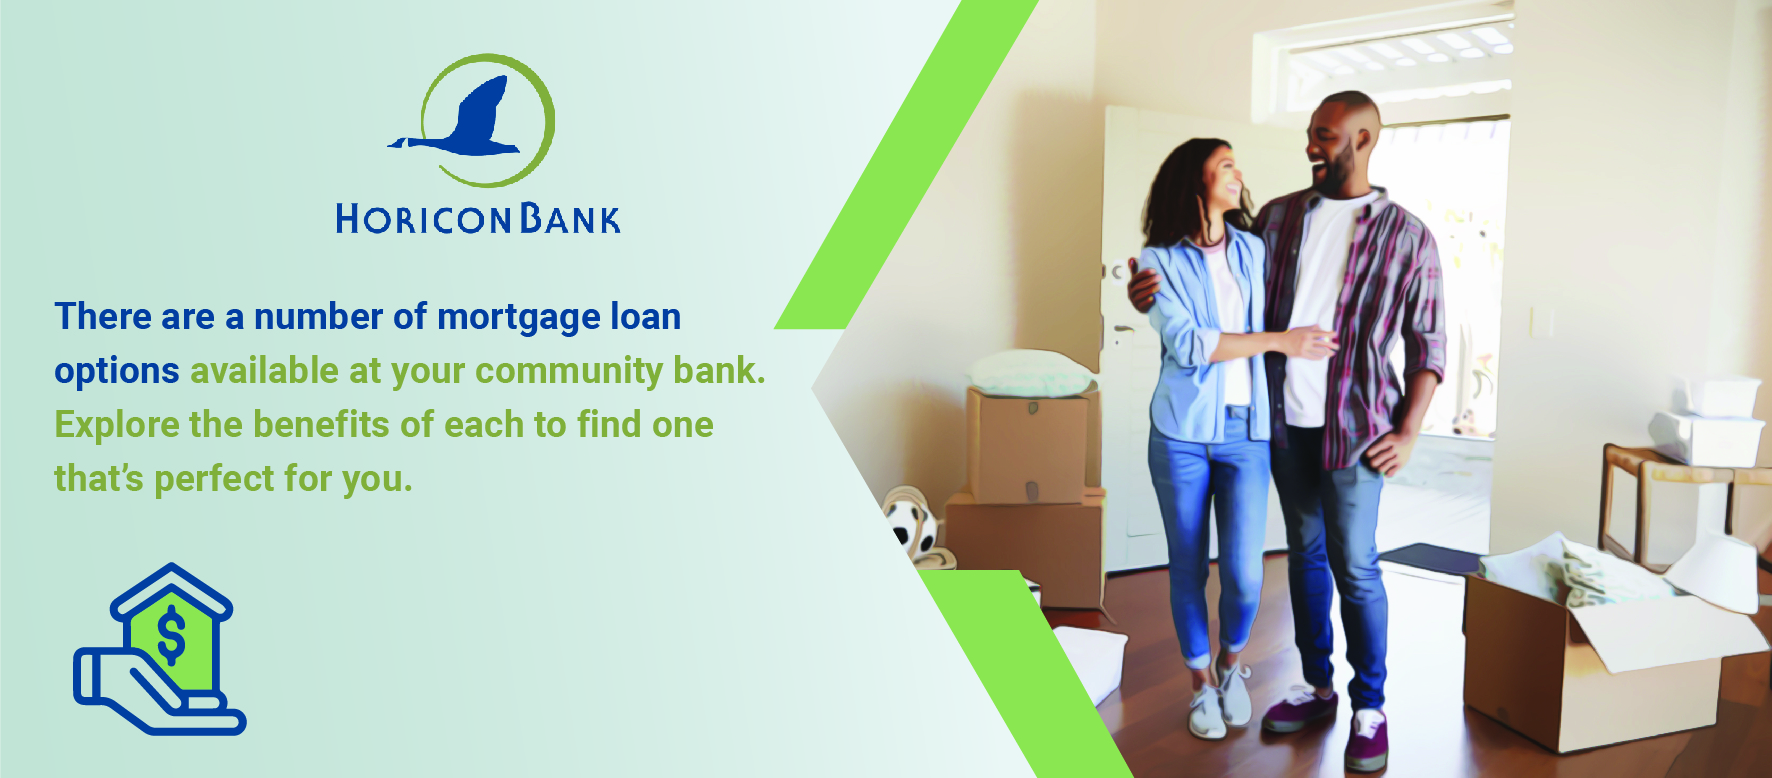 There are a number of mortgage loan options available at your community bank. Explore the benefits of each to find one that’s perfect for you.